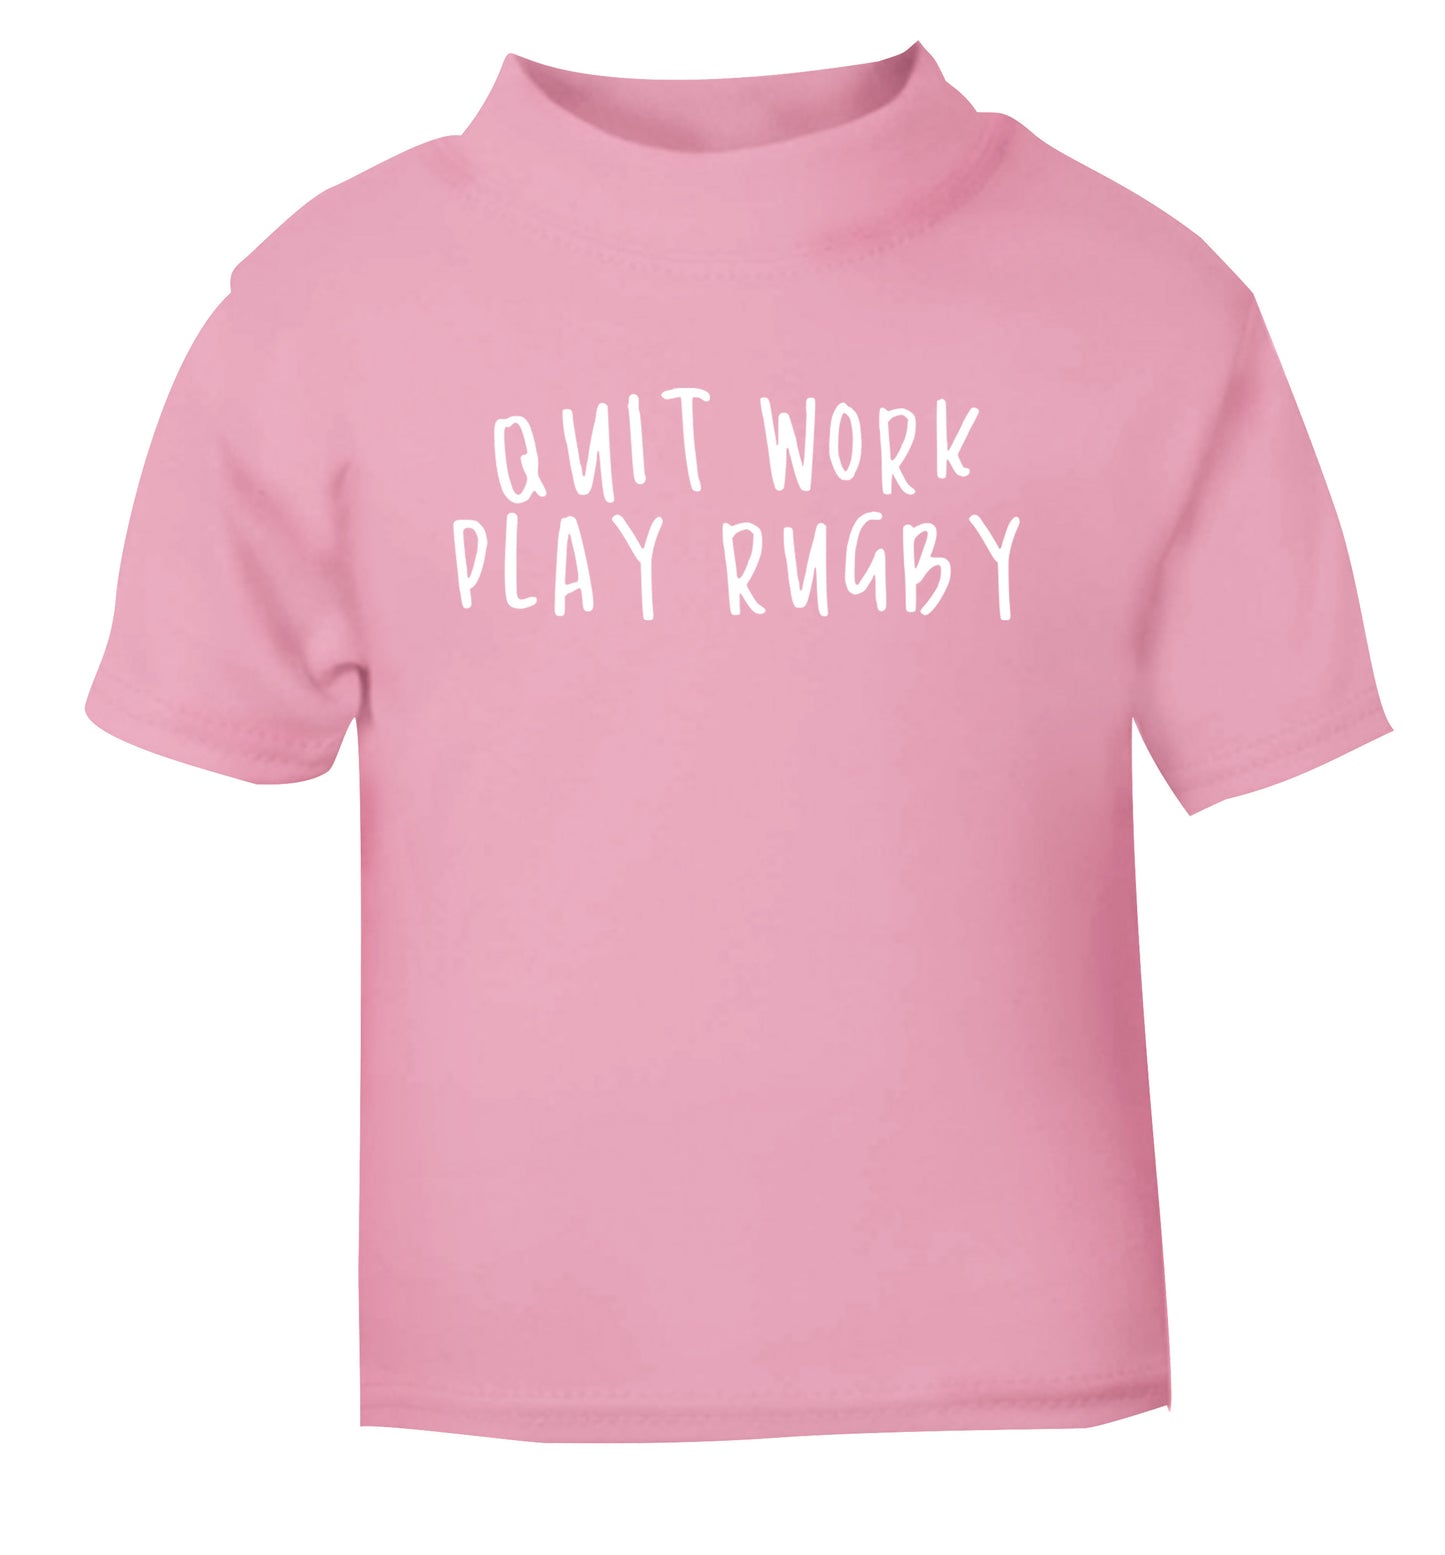 Quit work play rugby light pink Baby Toddler Tshirt 2 Years